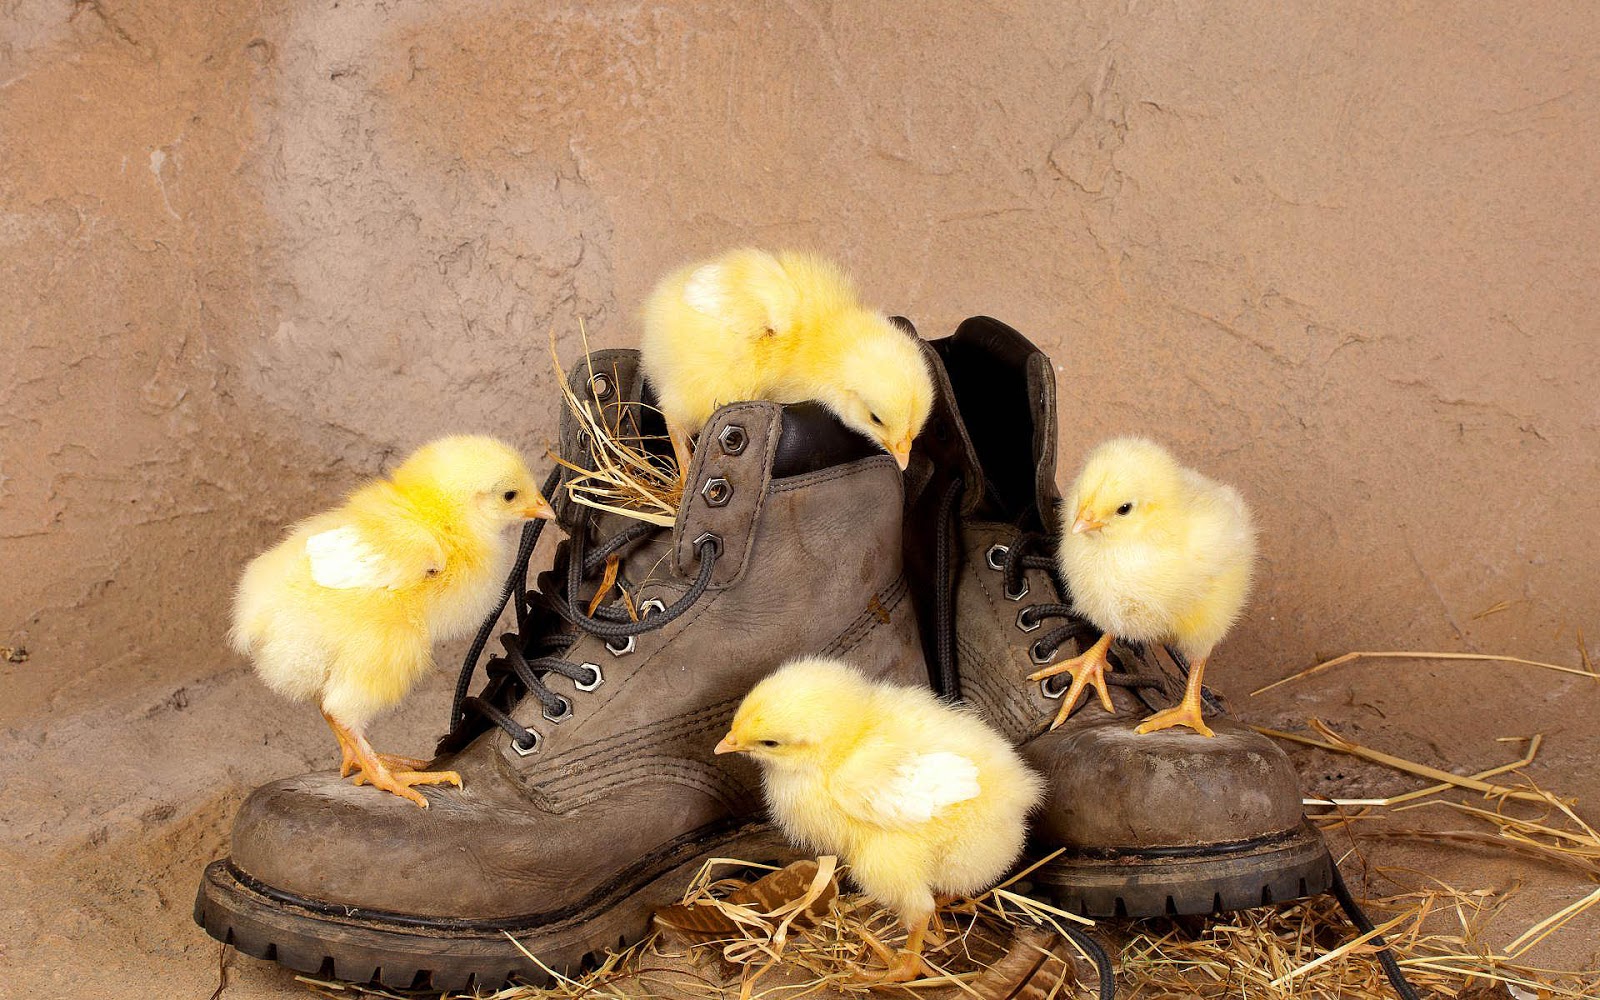 Funny Wallpaper With Yellow Chickens Playing Some Old Shoes